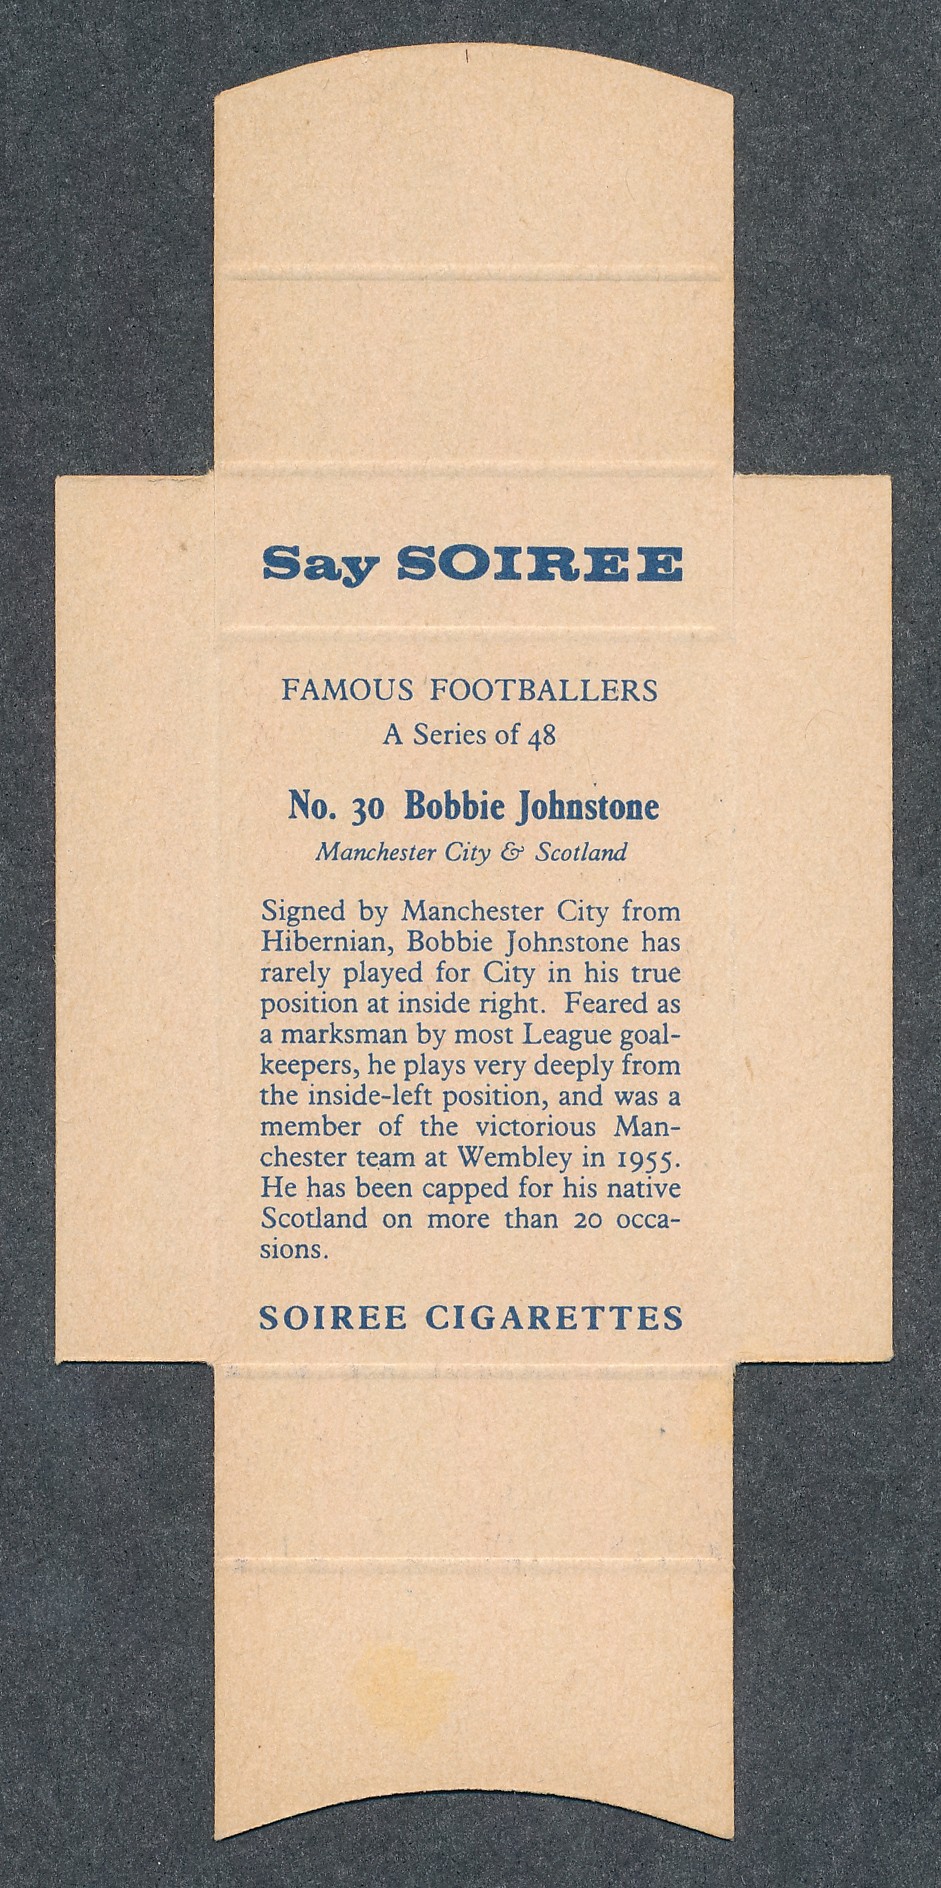 Soiree Cigarettes, Mauritius, Famous Footballers uncut packet issue, No.30 Bobbie Johnstone, - Image 2 of 2